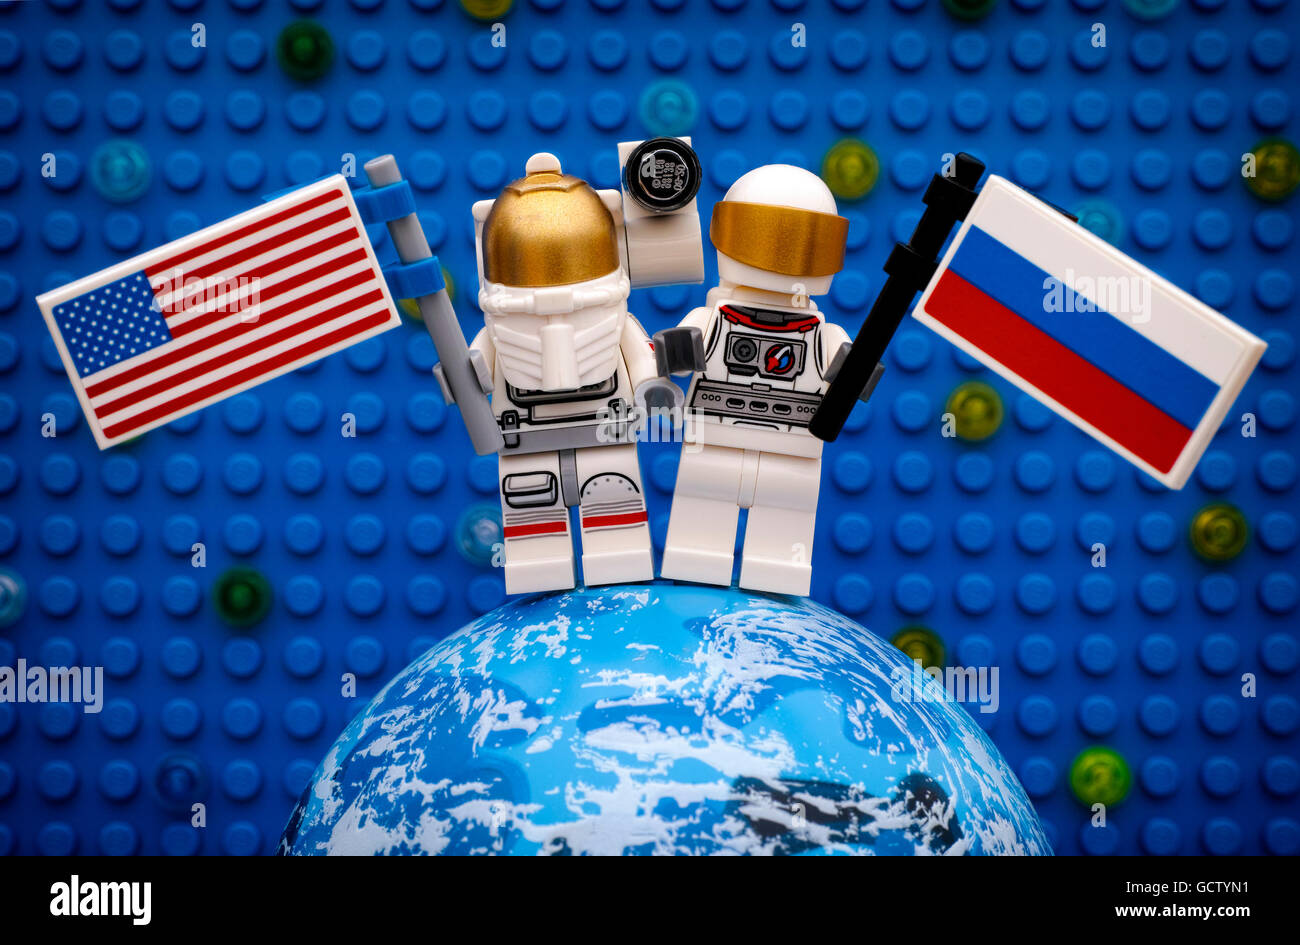 Two Lego spaceman minifigures with American and Russian flags stay on  planet against Lego blue baseplate with stars Stock Photo - Alamy